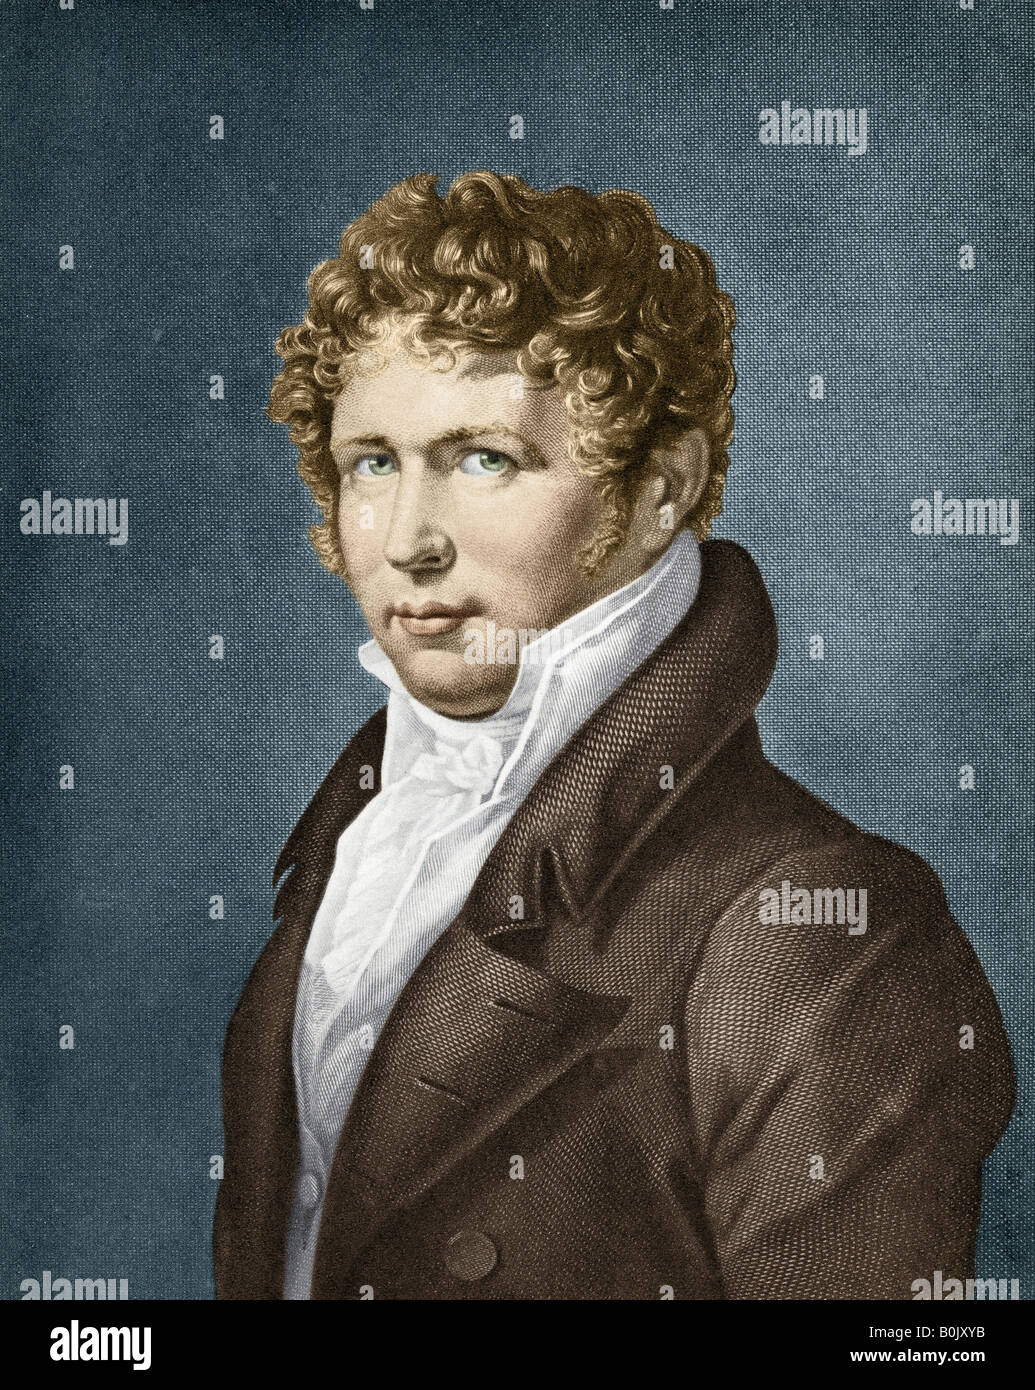 Alexander von Humboldt, German naturalist and explorer who traveled to Central and South America, Russia, and Siberia. Stock Photo